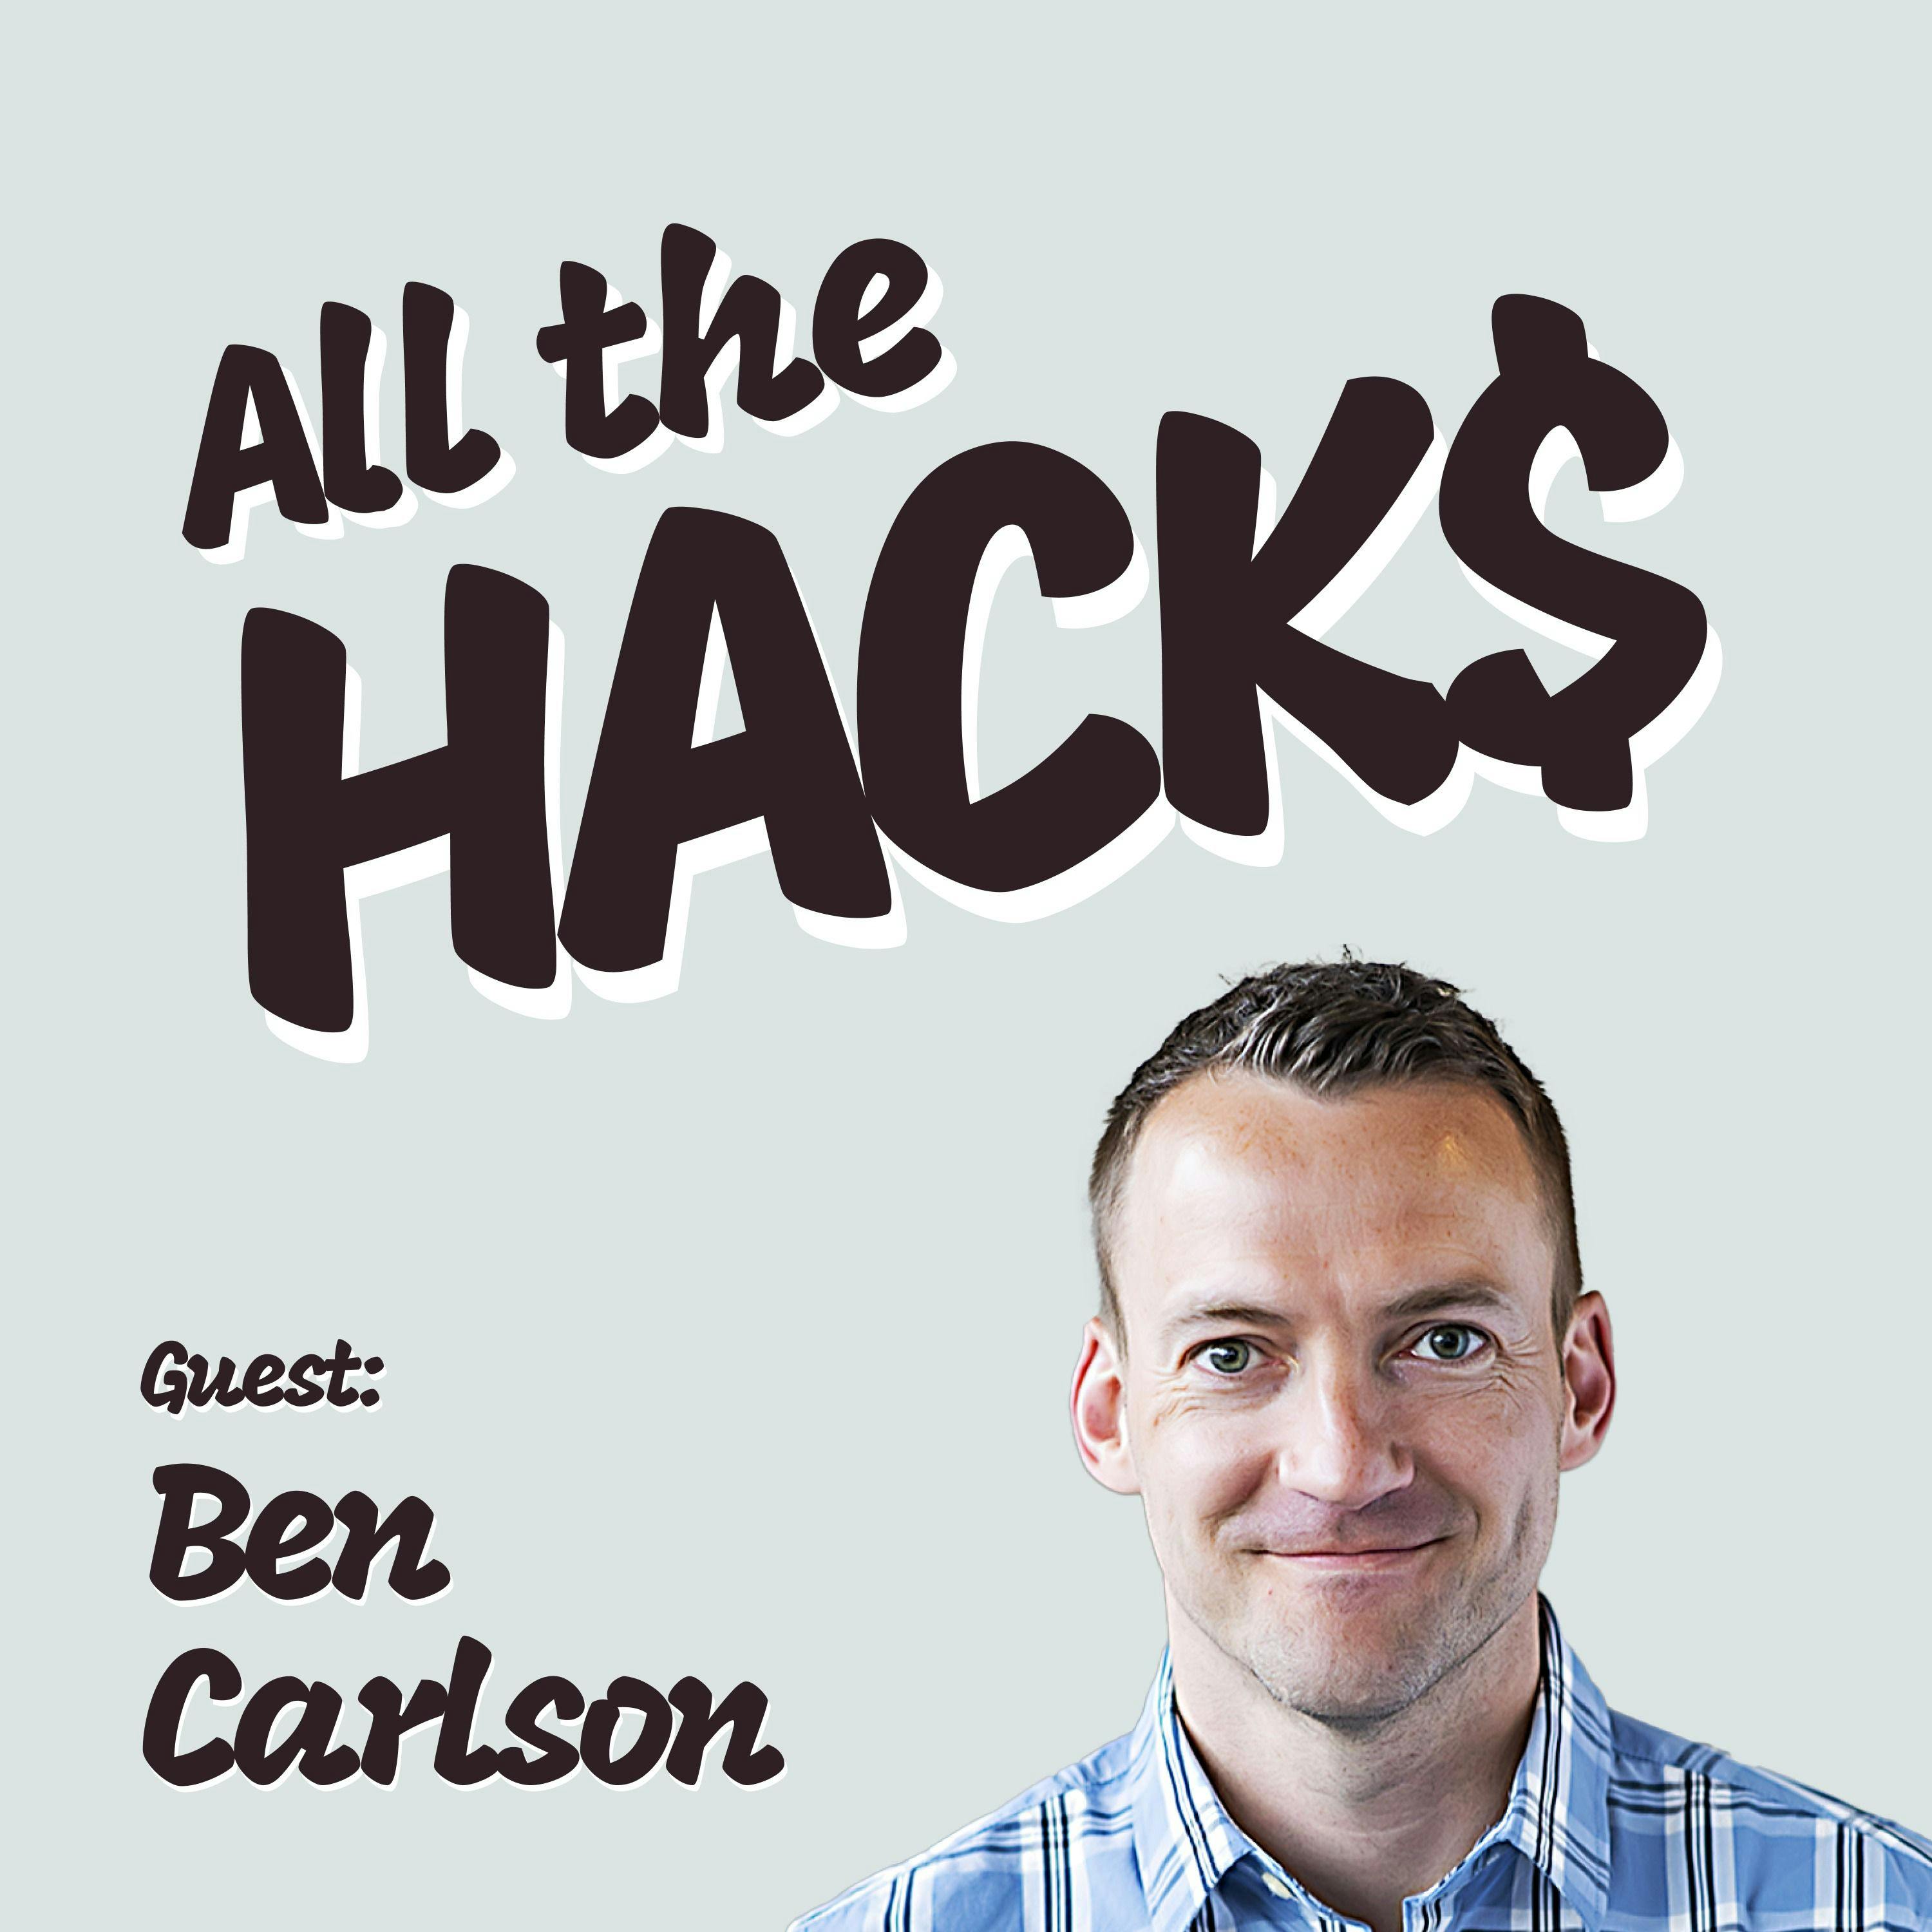 Beating Inflation, Alternative Assets, and Simplifying Your Finances with Ben Carlson